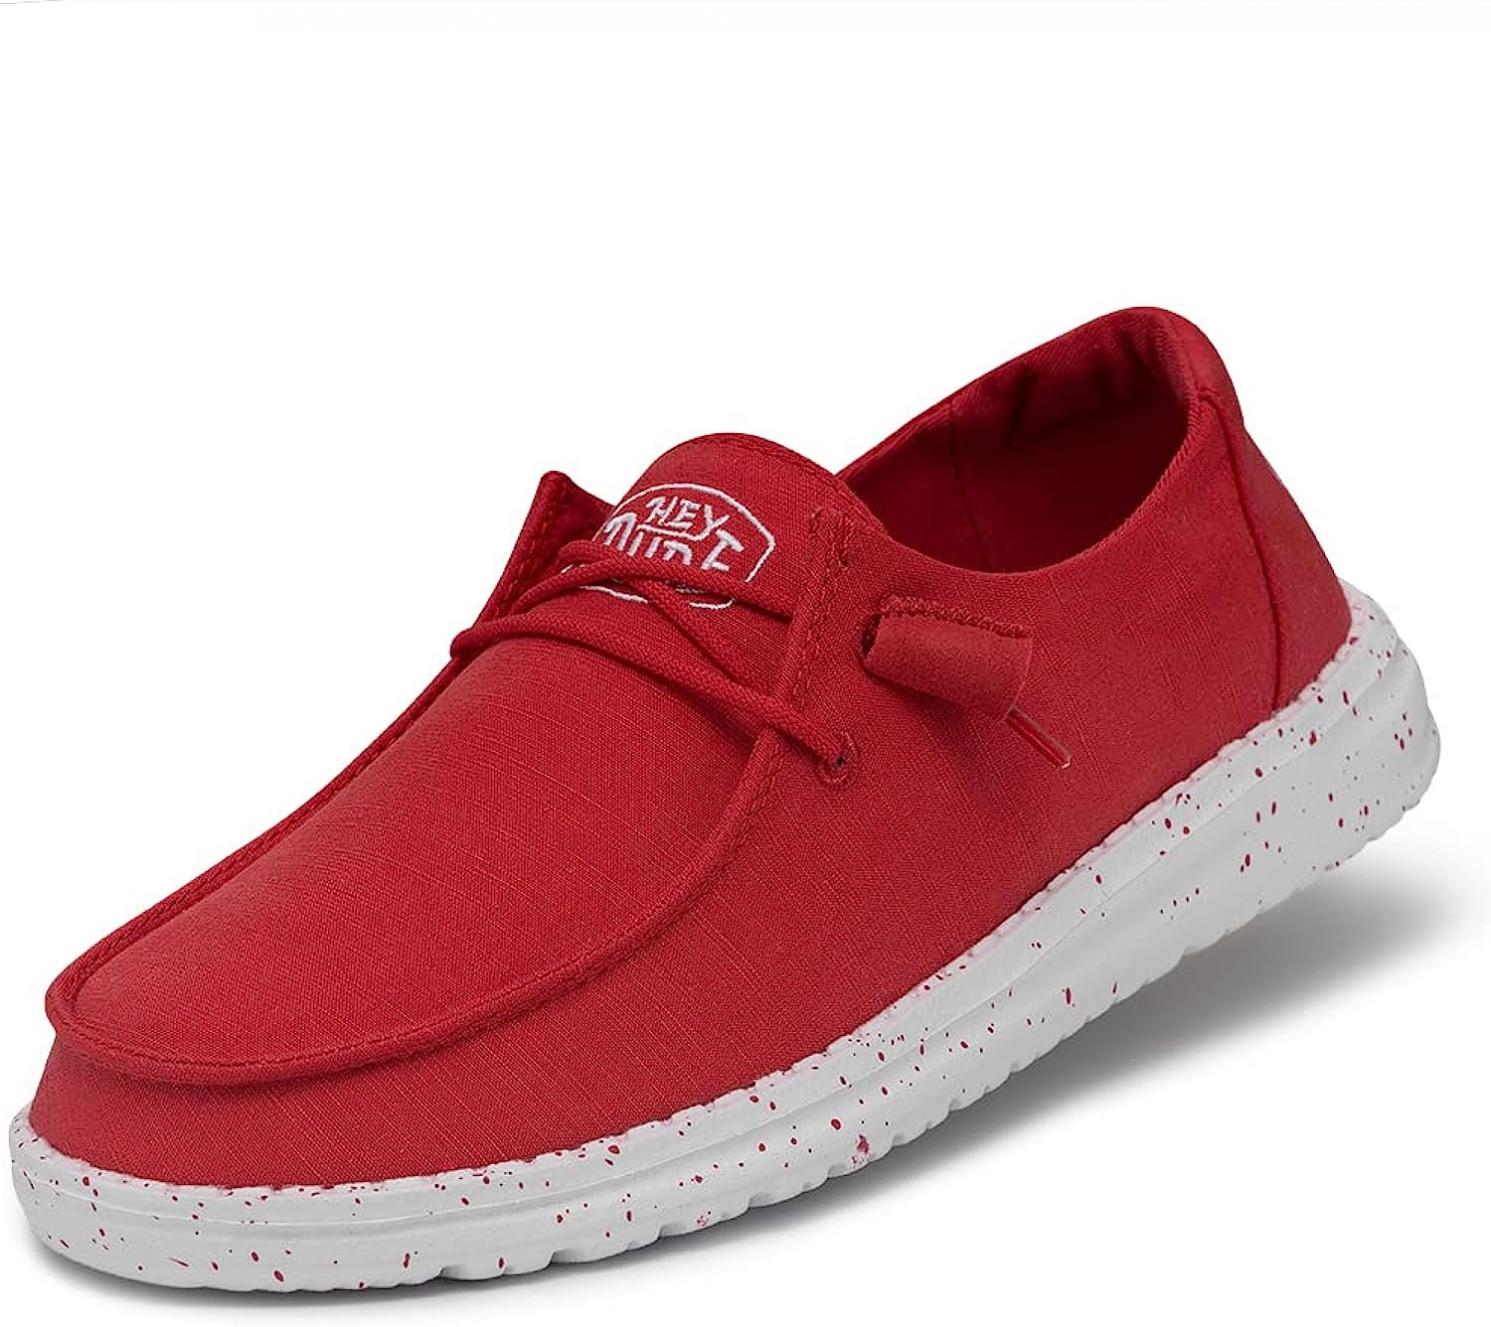 Hey Dude Women's Wendy Slub Canvas Red Size 11 | Women's Shoes | Women's Slip On Shoes | Comfortable & Light-Weight